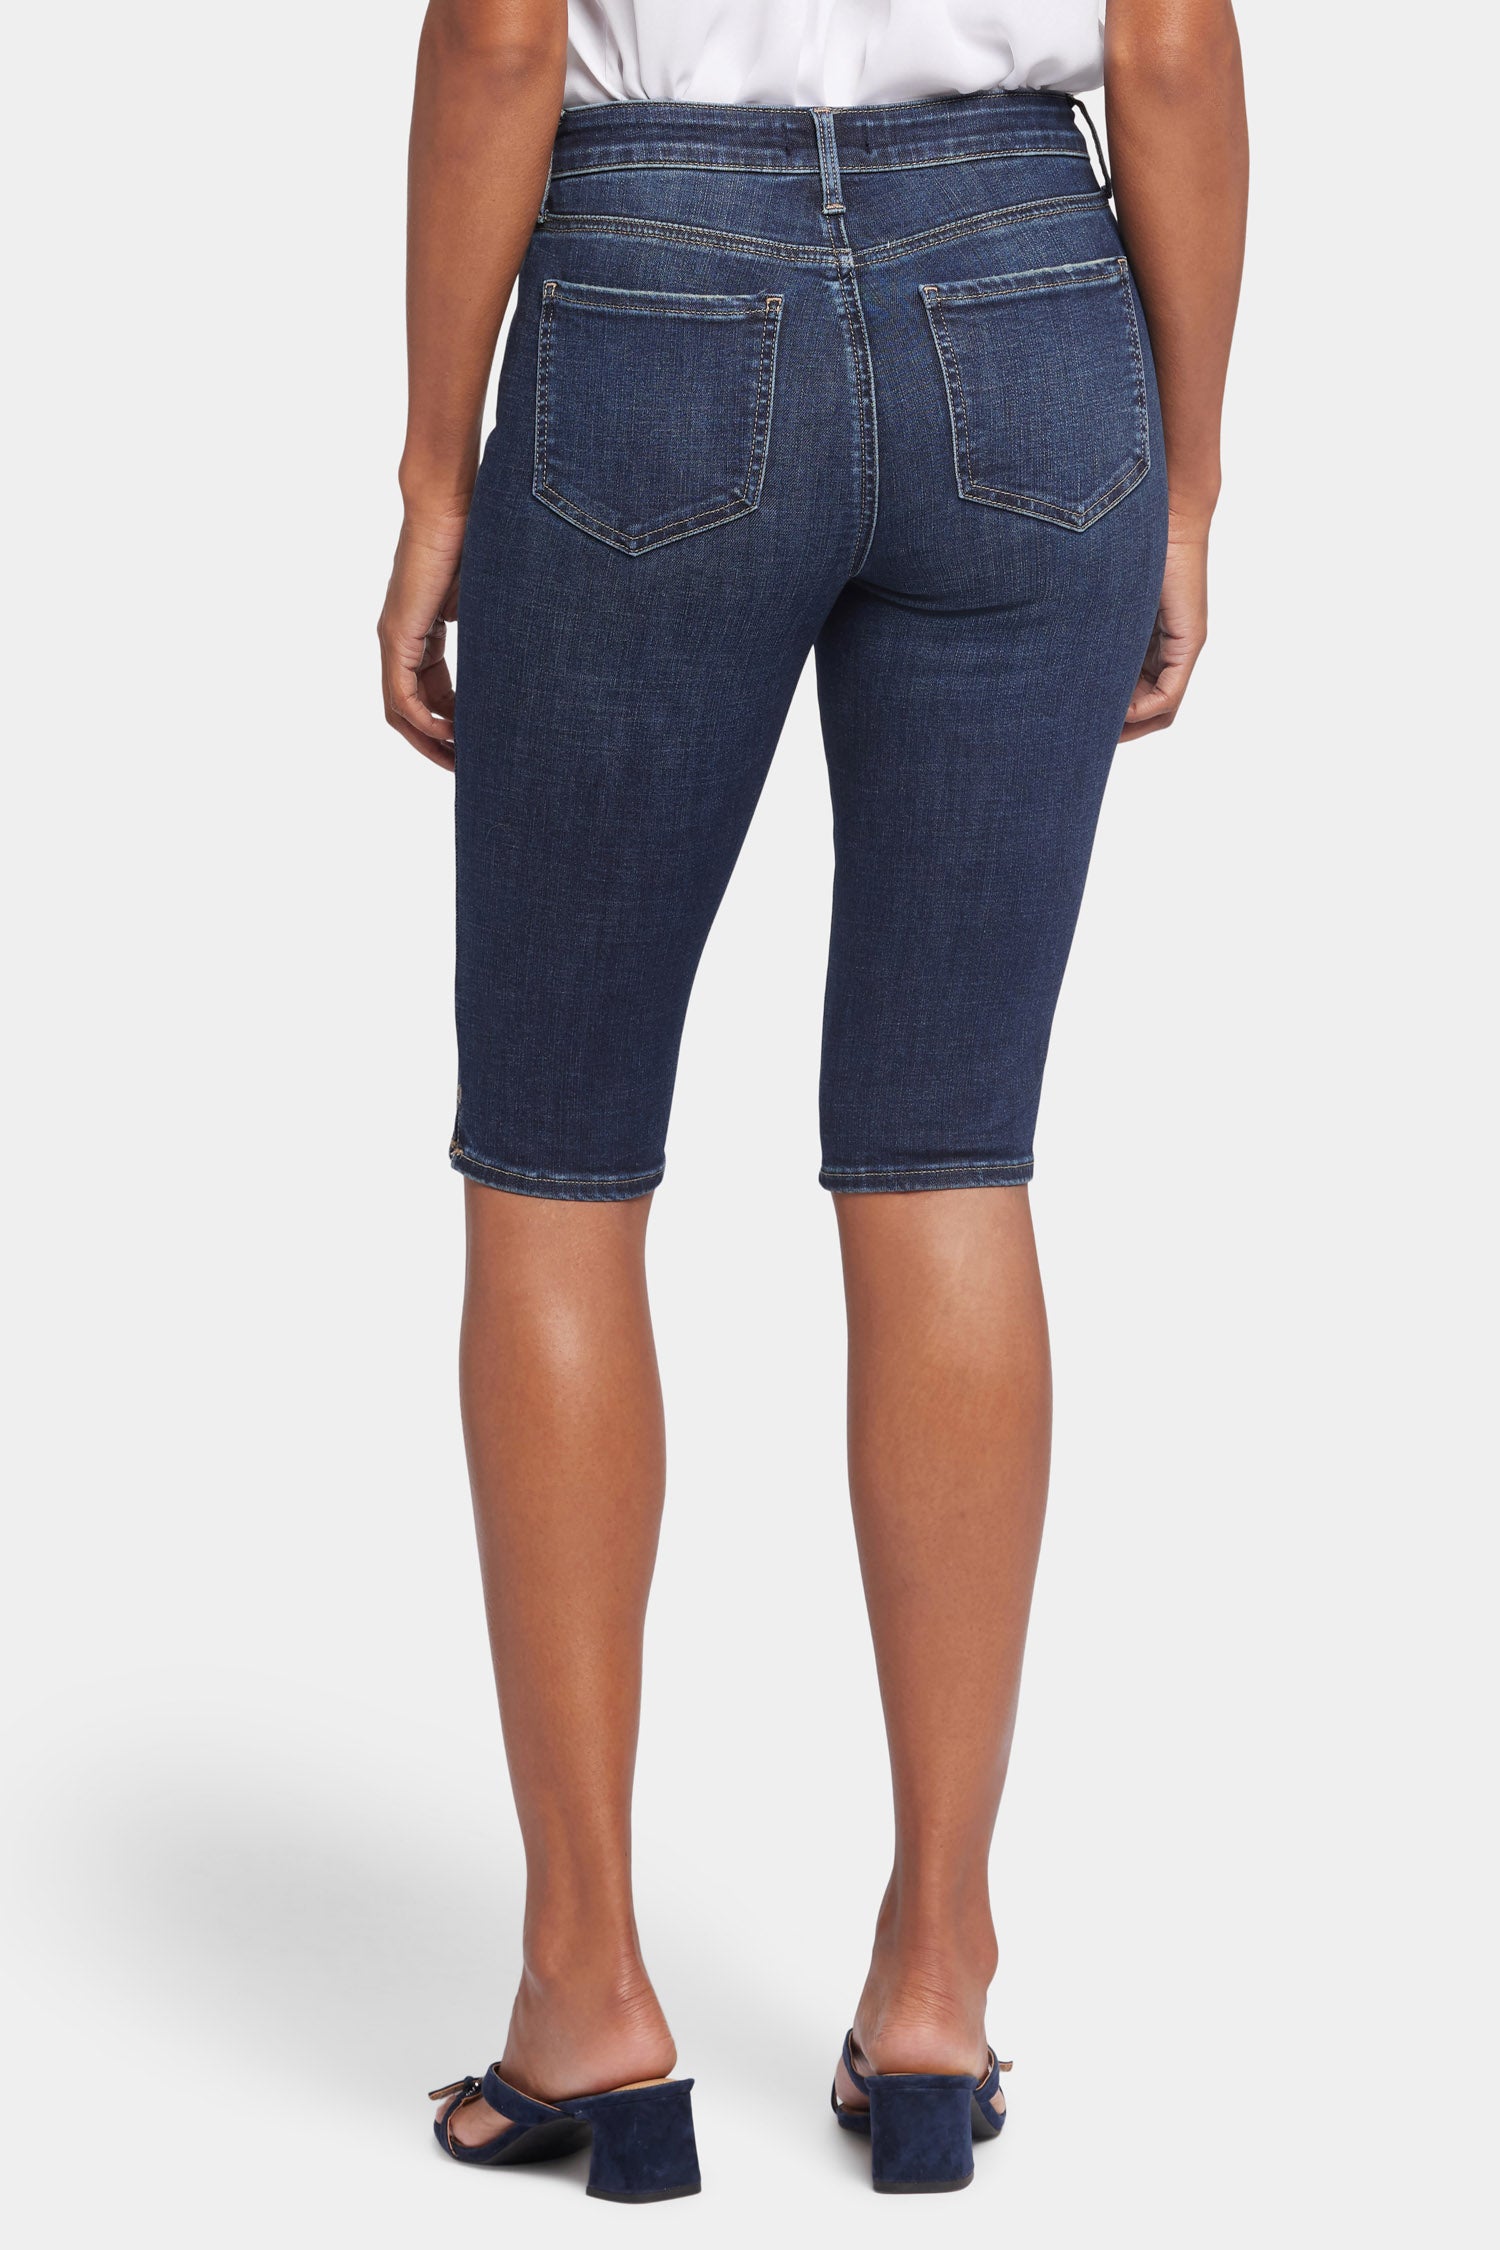 Sophie Bike Capri Jeans In Petite With Riveted Side Slits